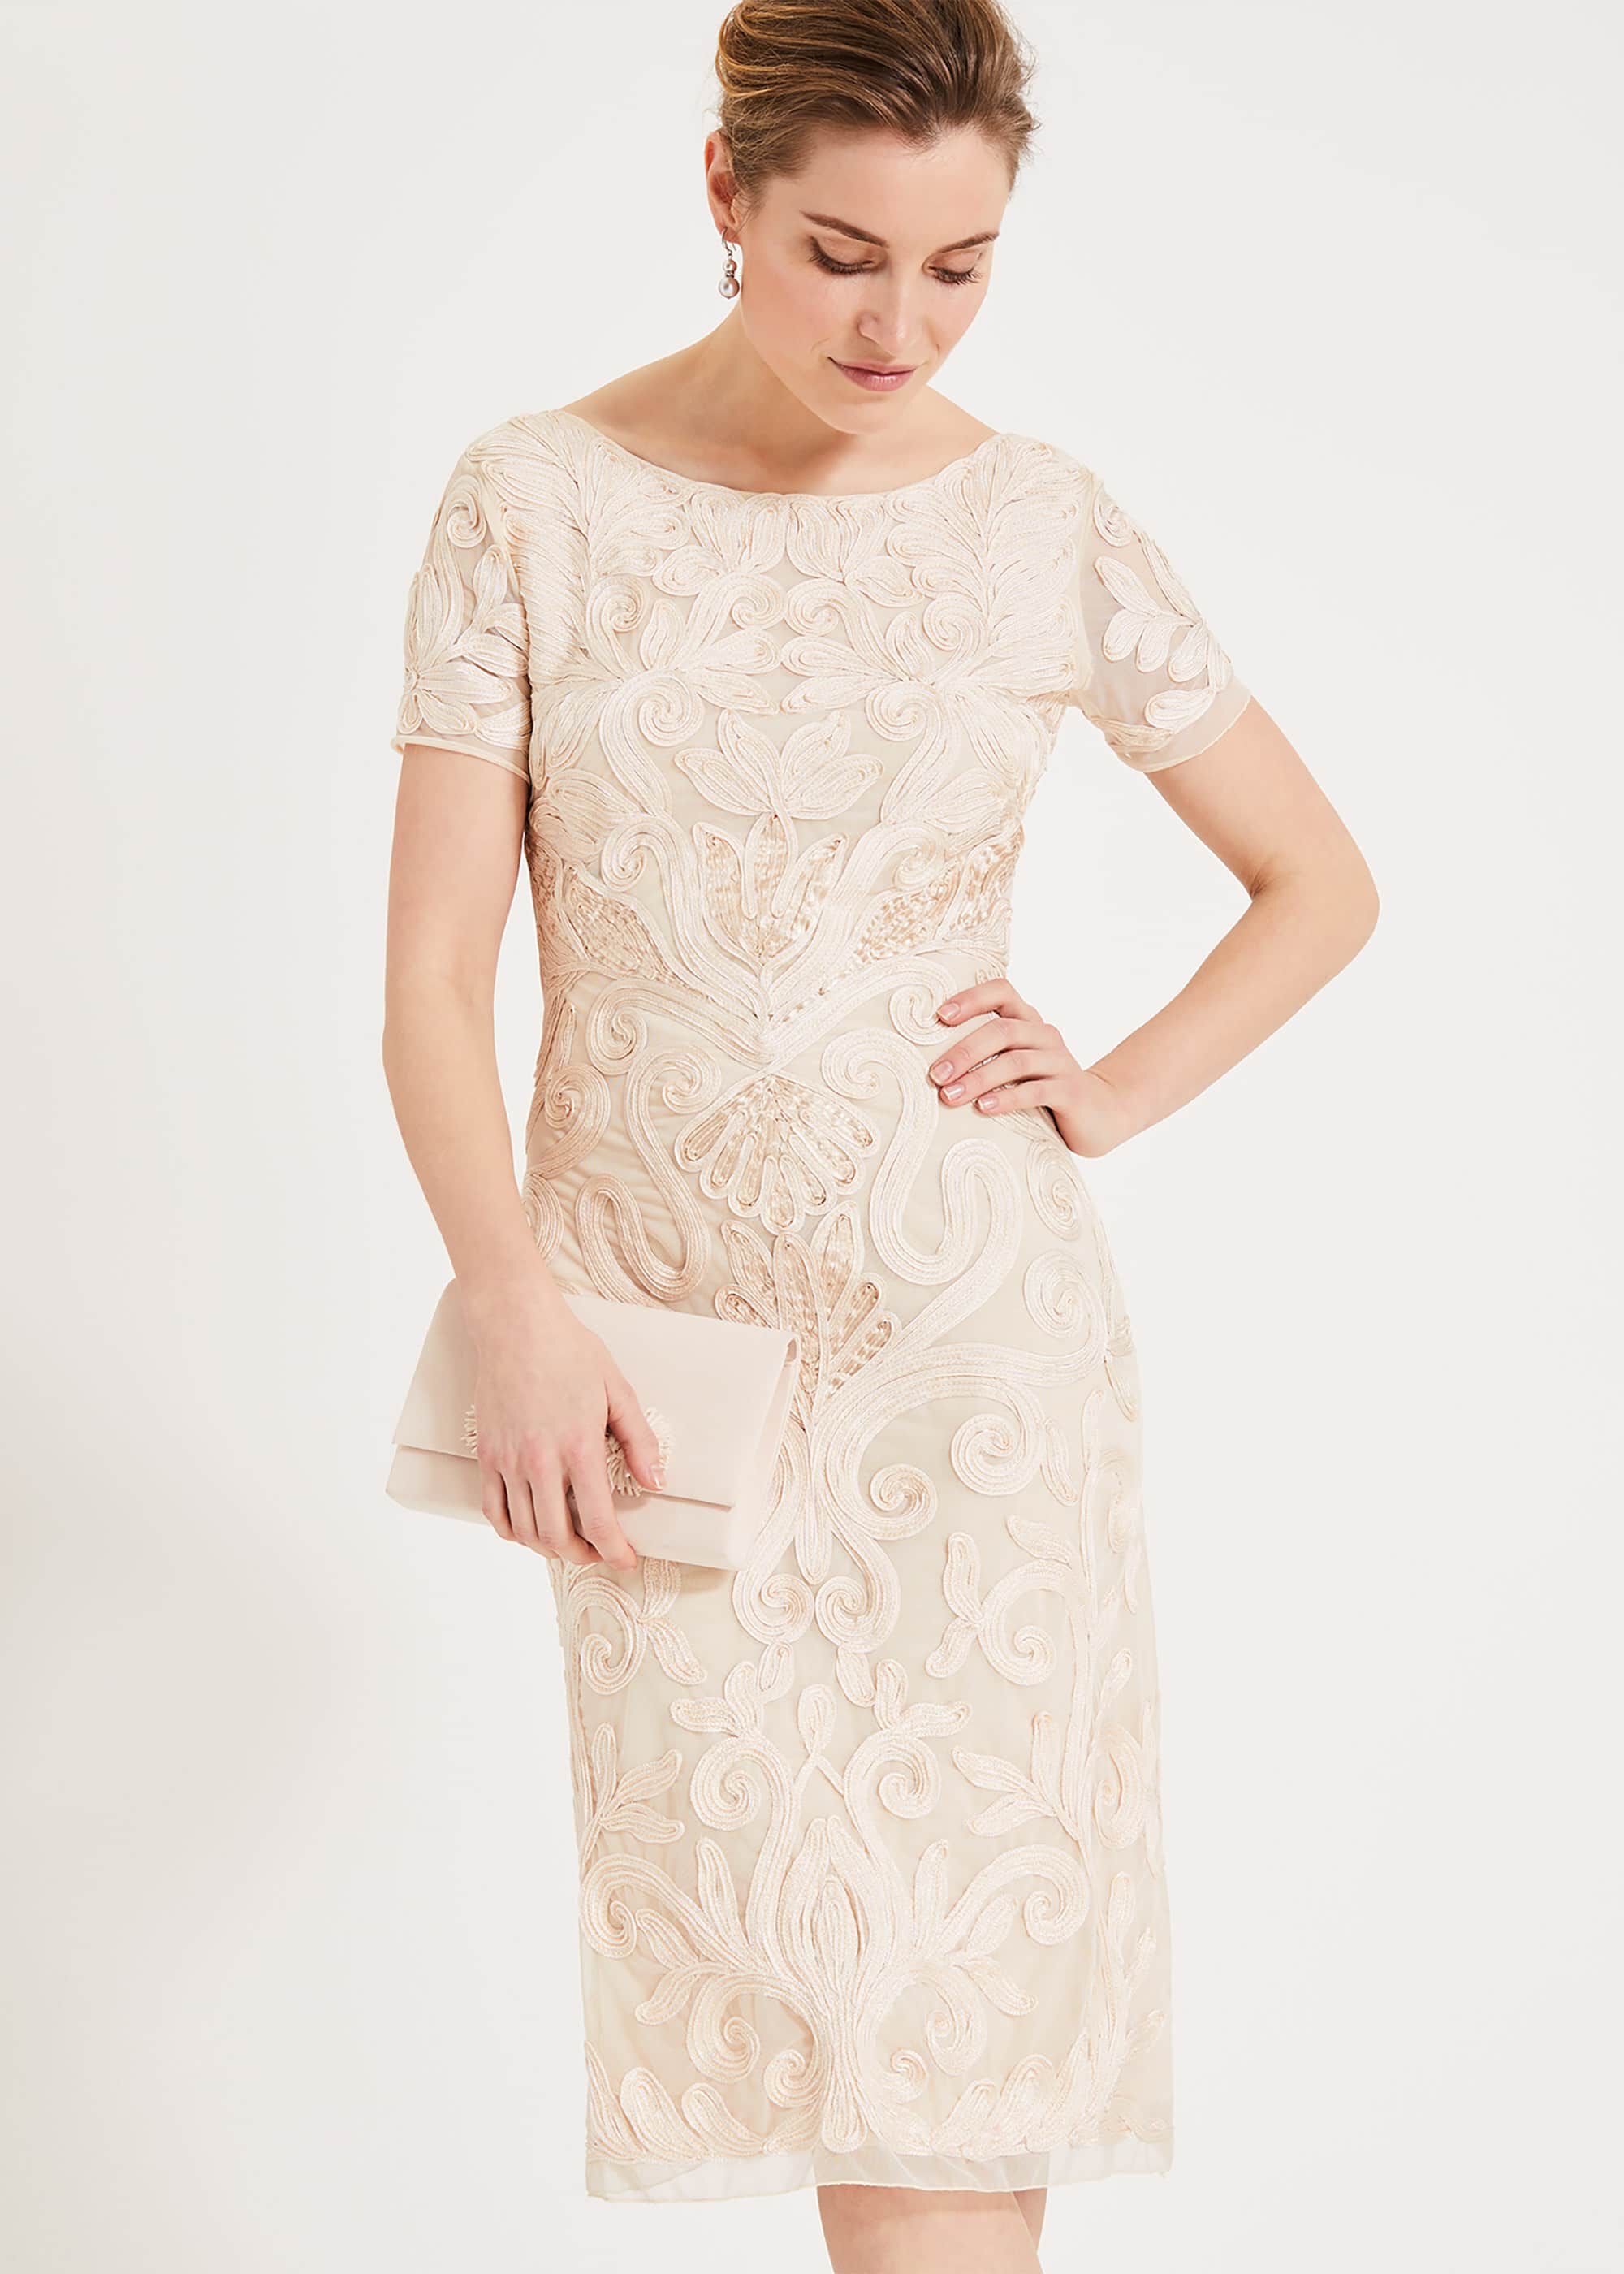 Phase Eight Exclusive Dresses on Sale, 57% OFF | www.emanagreen.com